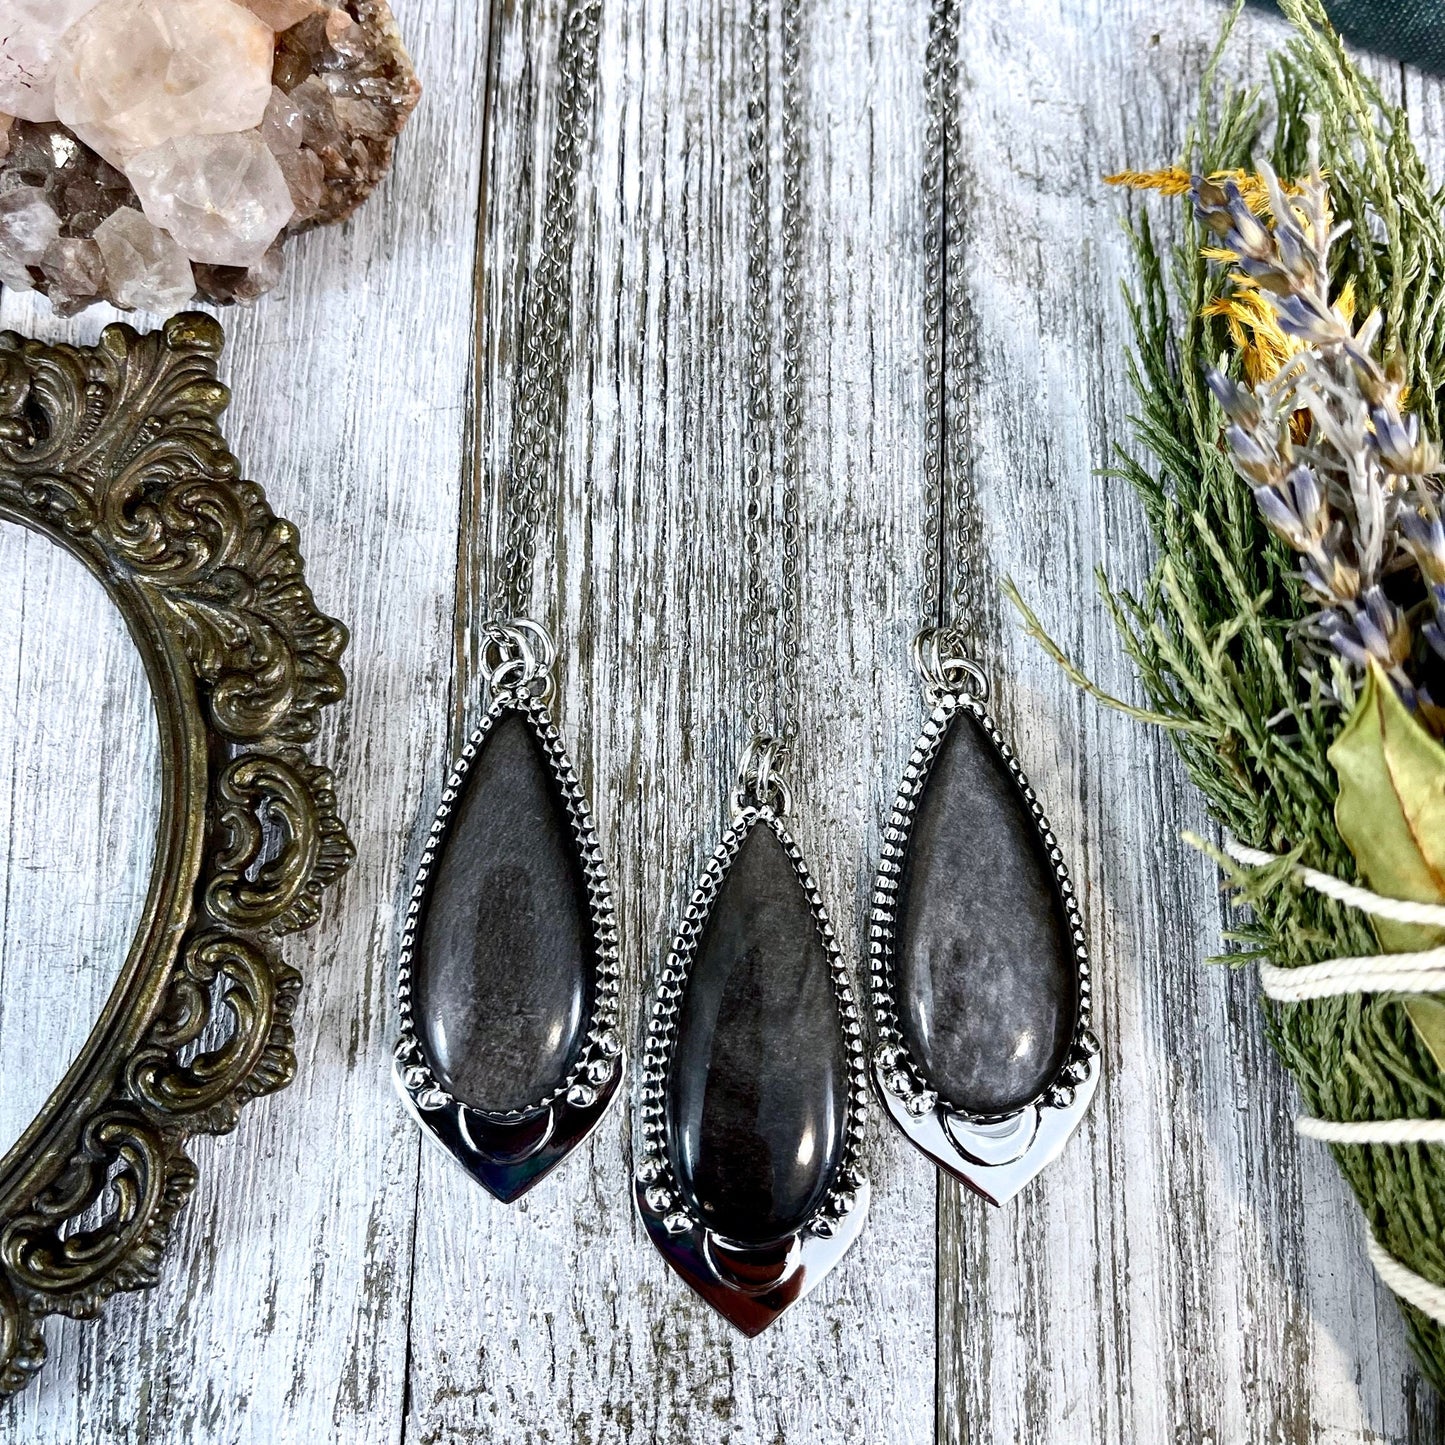 Midnight Moon Necklace - Silver Sheen Crystal Teardrop Necklace in Sterling Silver -Designed by FOXLARK Collection / Gothic Jewelry